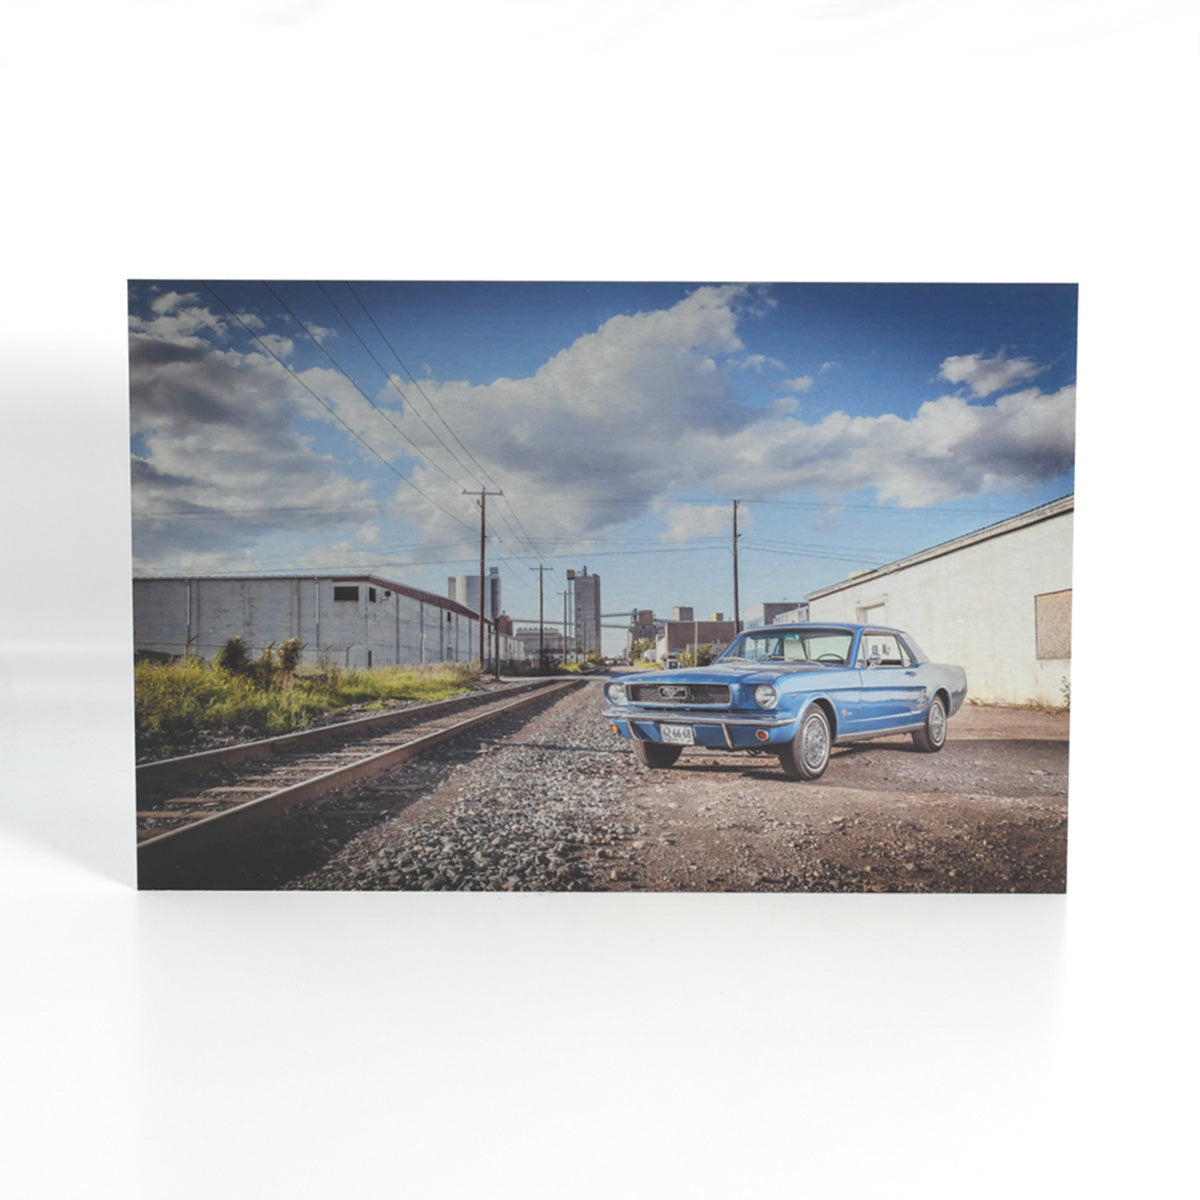 1966 Ford Mustang by Train Tracks in Alberta - Printed on Classic Silver Metal Print